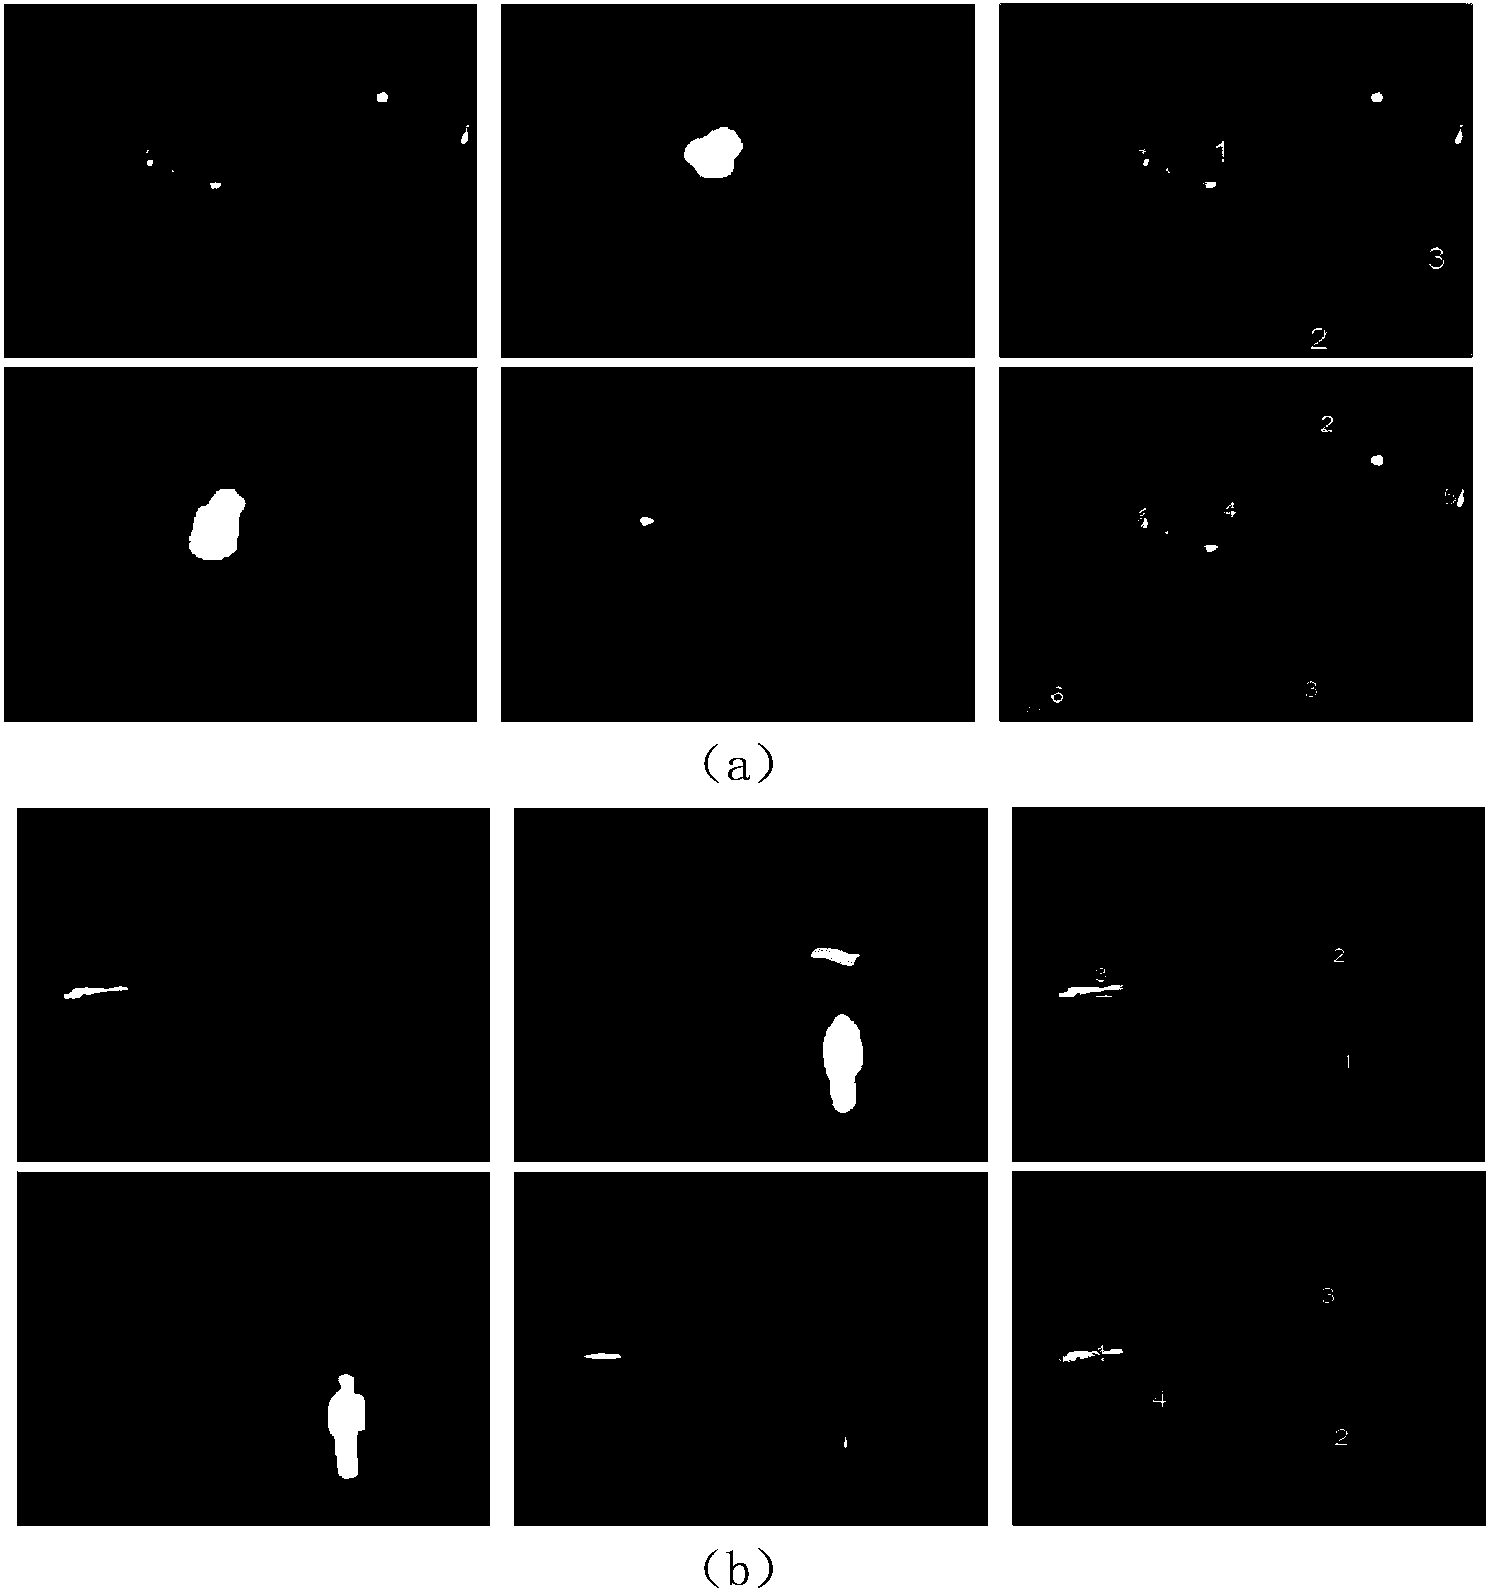 Low-light-level image target detection method based on texture significance